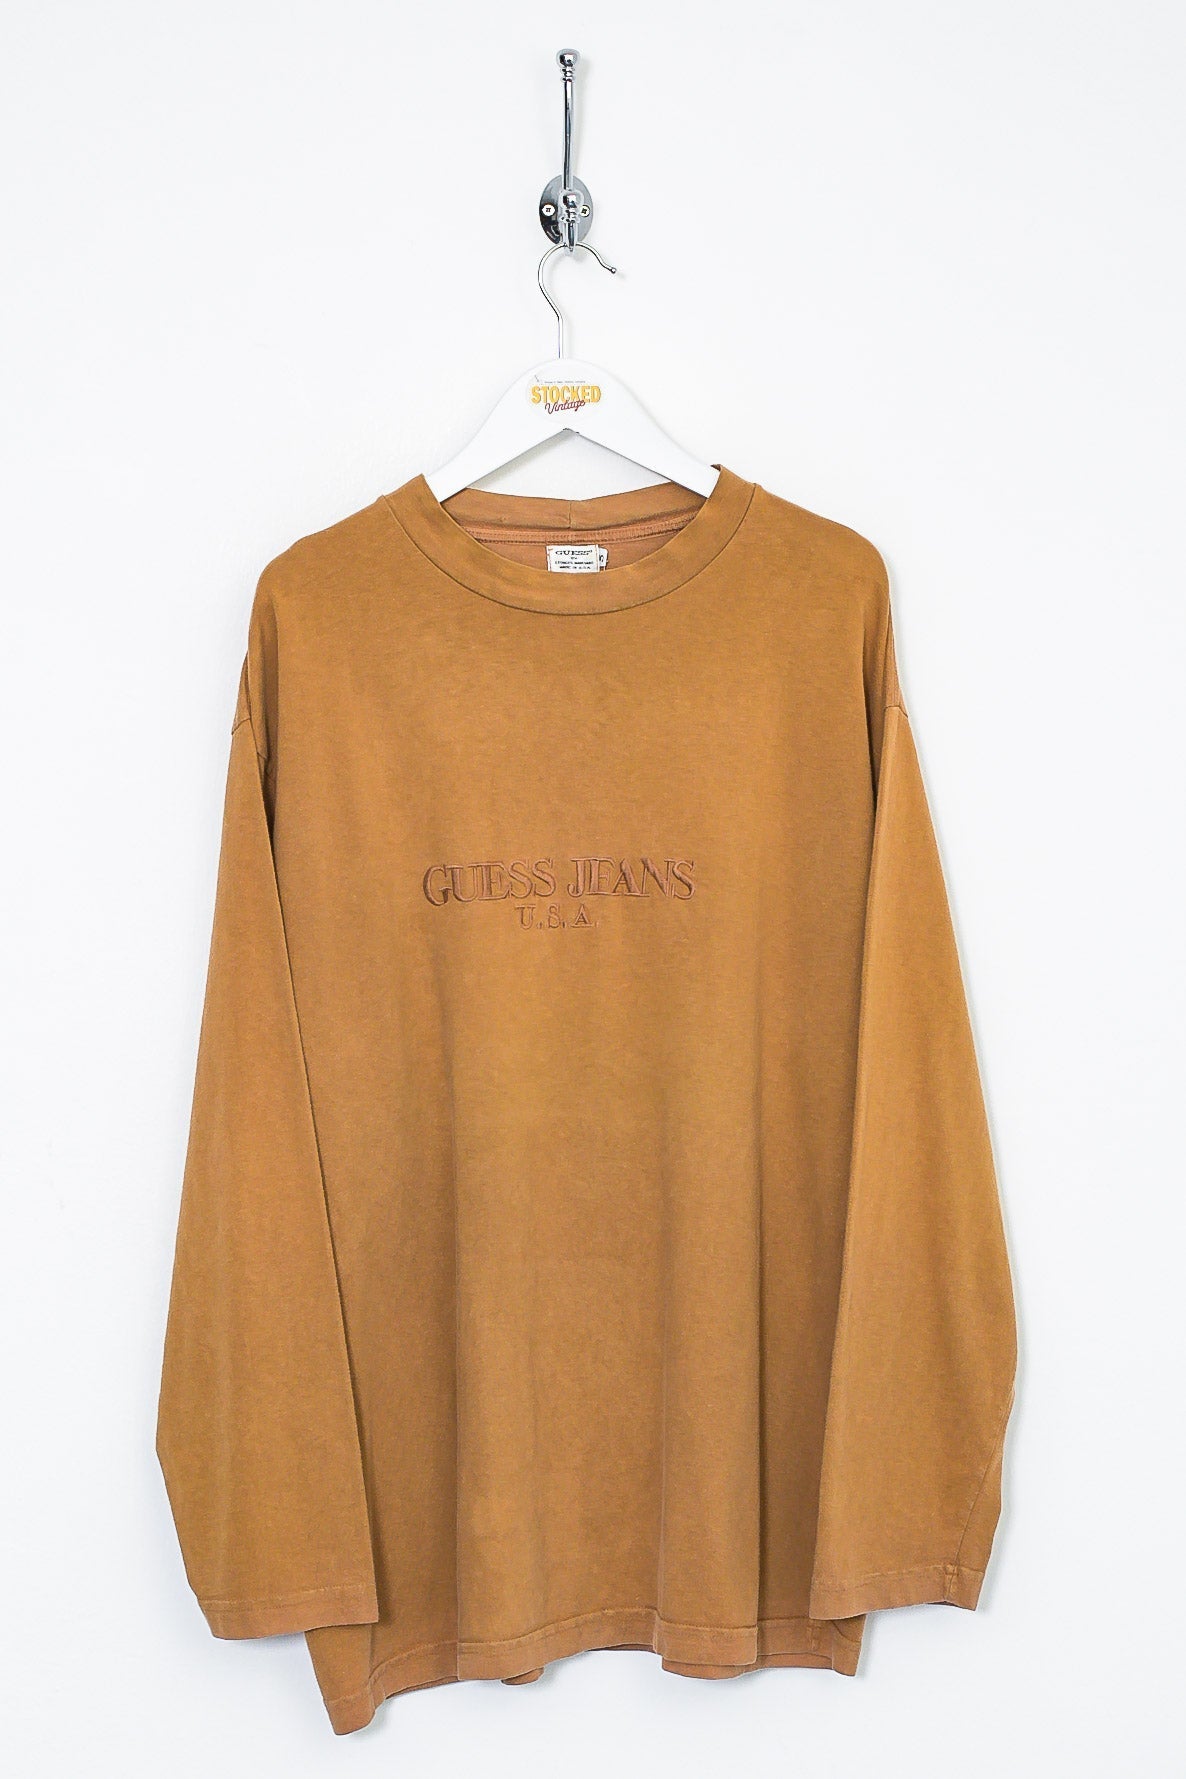 90s Guess Jeans Long Sleeve Tee (L)